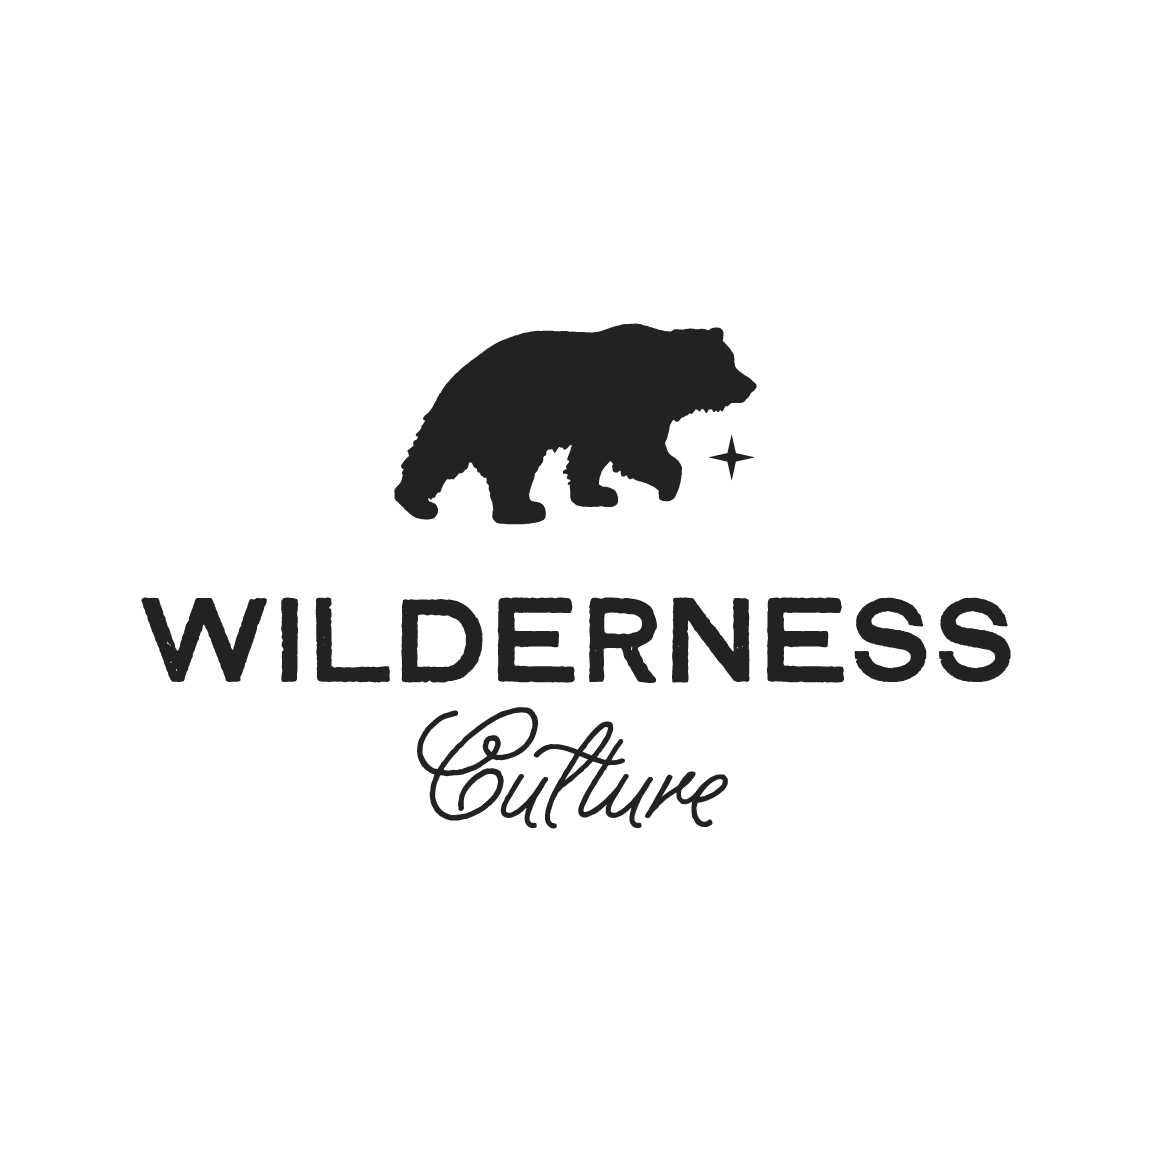 Wilderness Logo - Wilderness Culture Project Branding and Logo Design Project